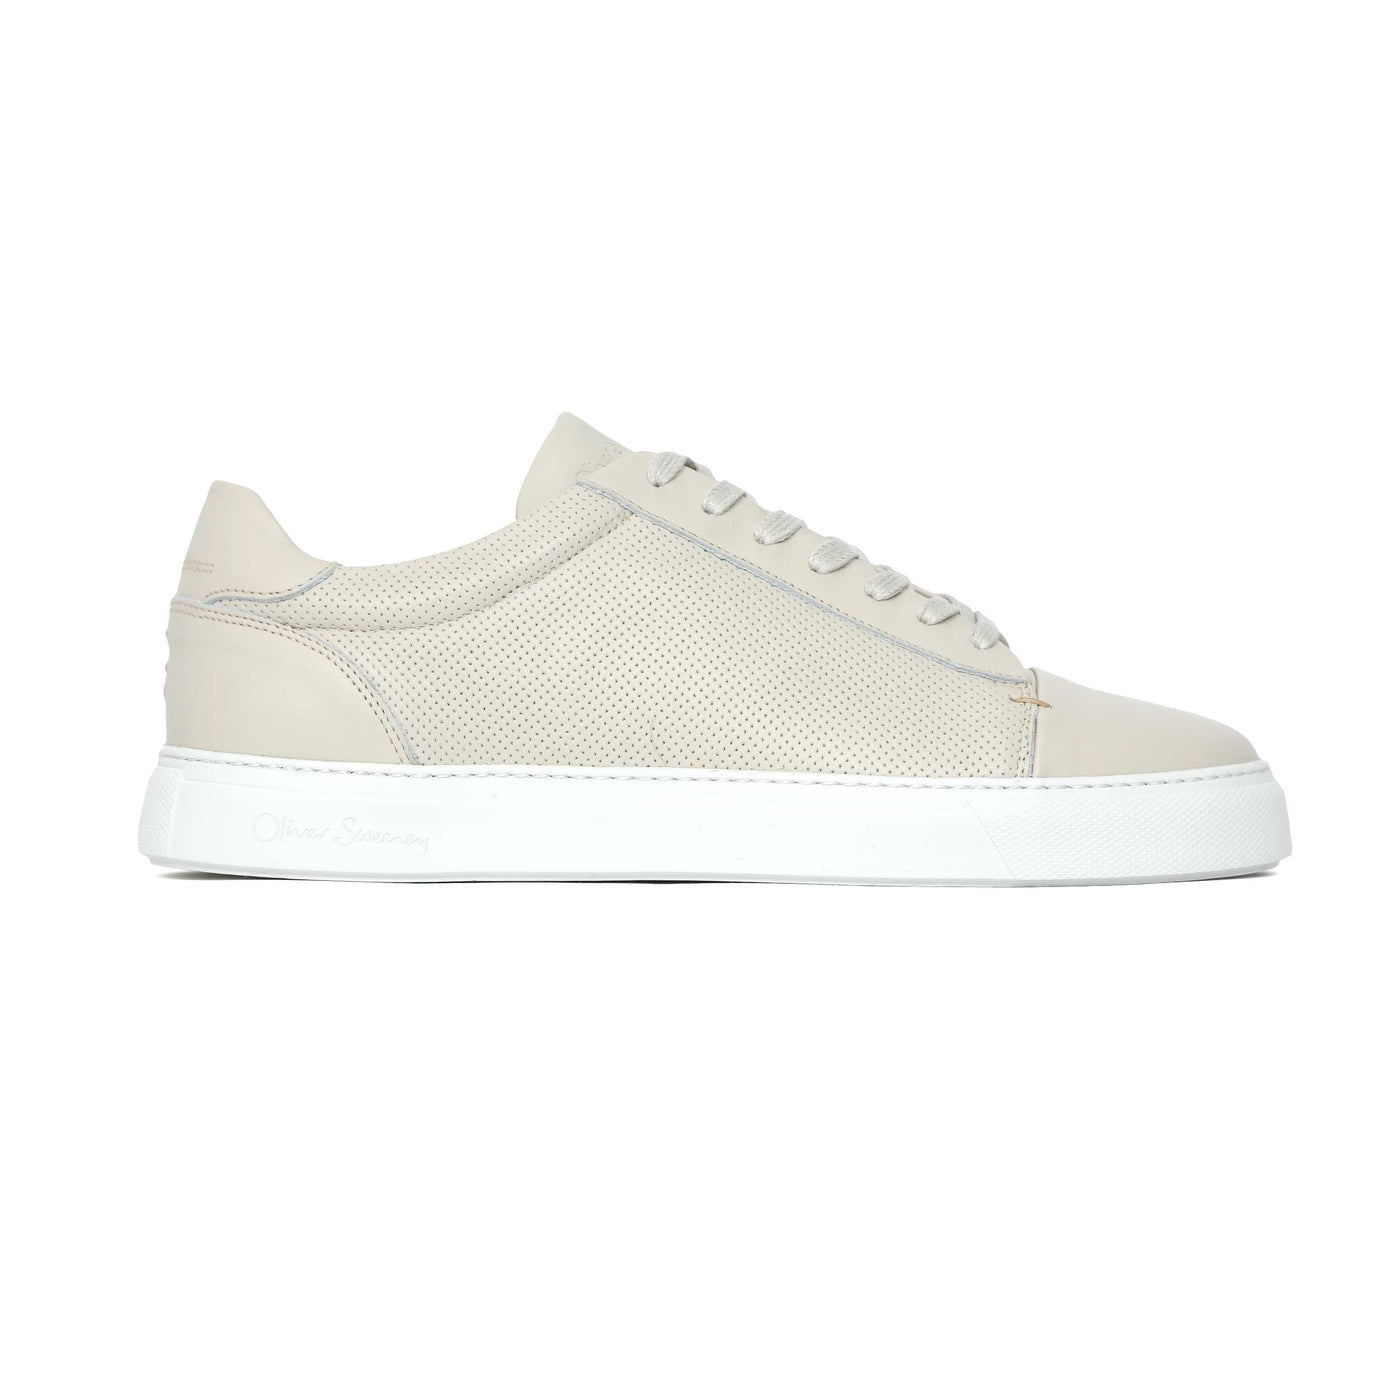 Oliver Sweeney Almada Trainer in Off White